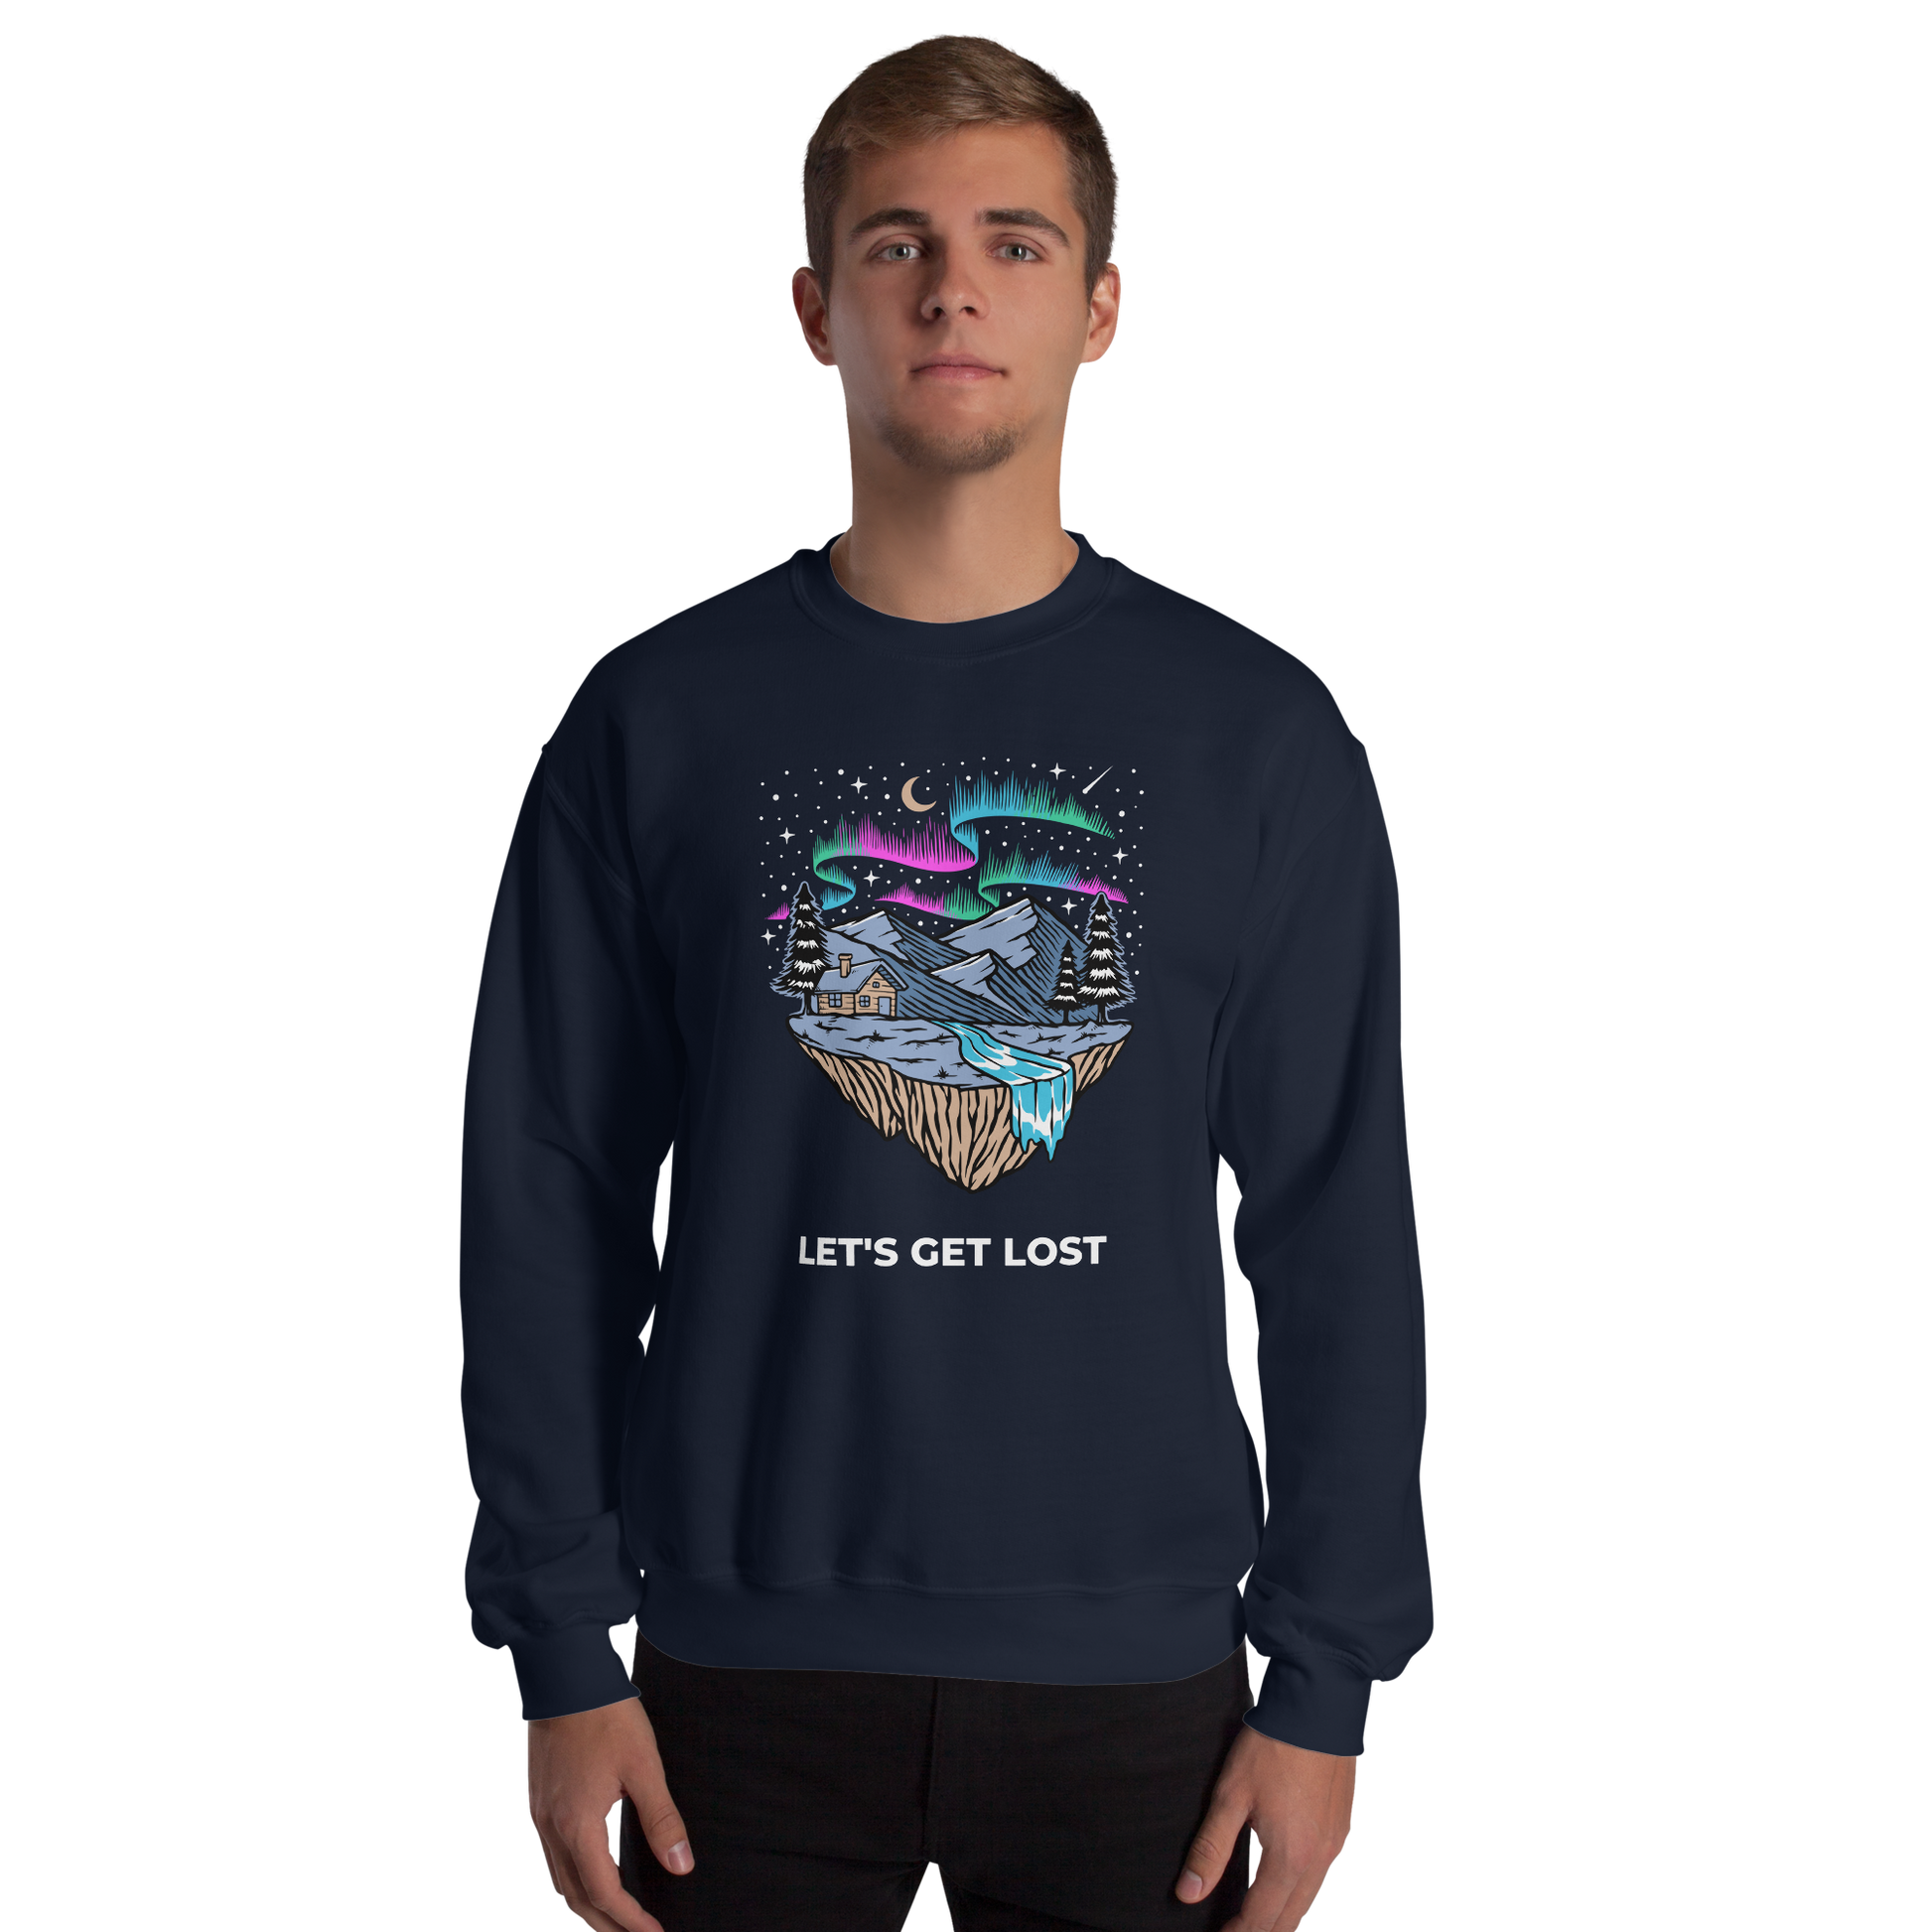 Man wearing a Navy Let's Get Lost Sweatshirt featuring a mesmerizing night sky, adorned with stars and aurora borealis graphic on the chest - Cool Graphic Northern Lights Sweatshirts - Boozy Fox